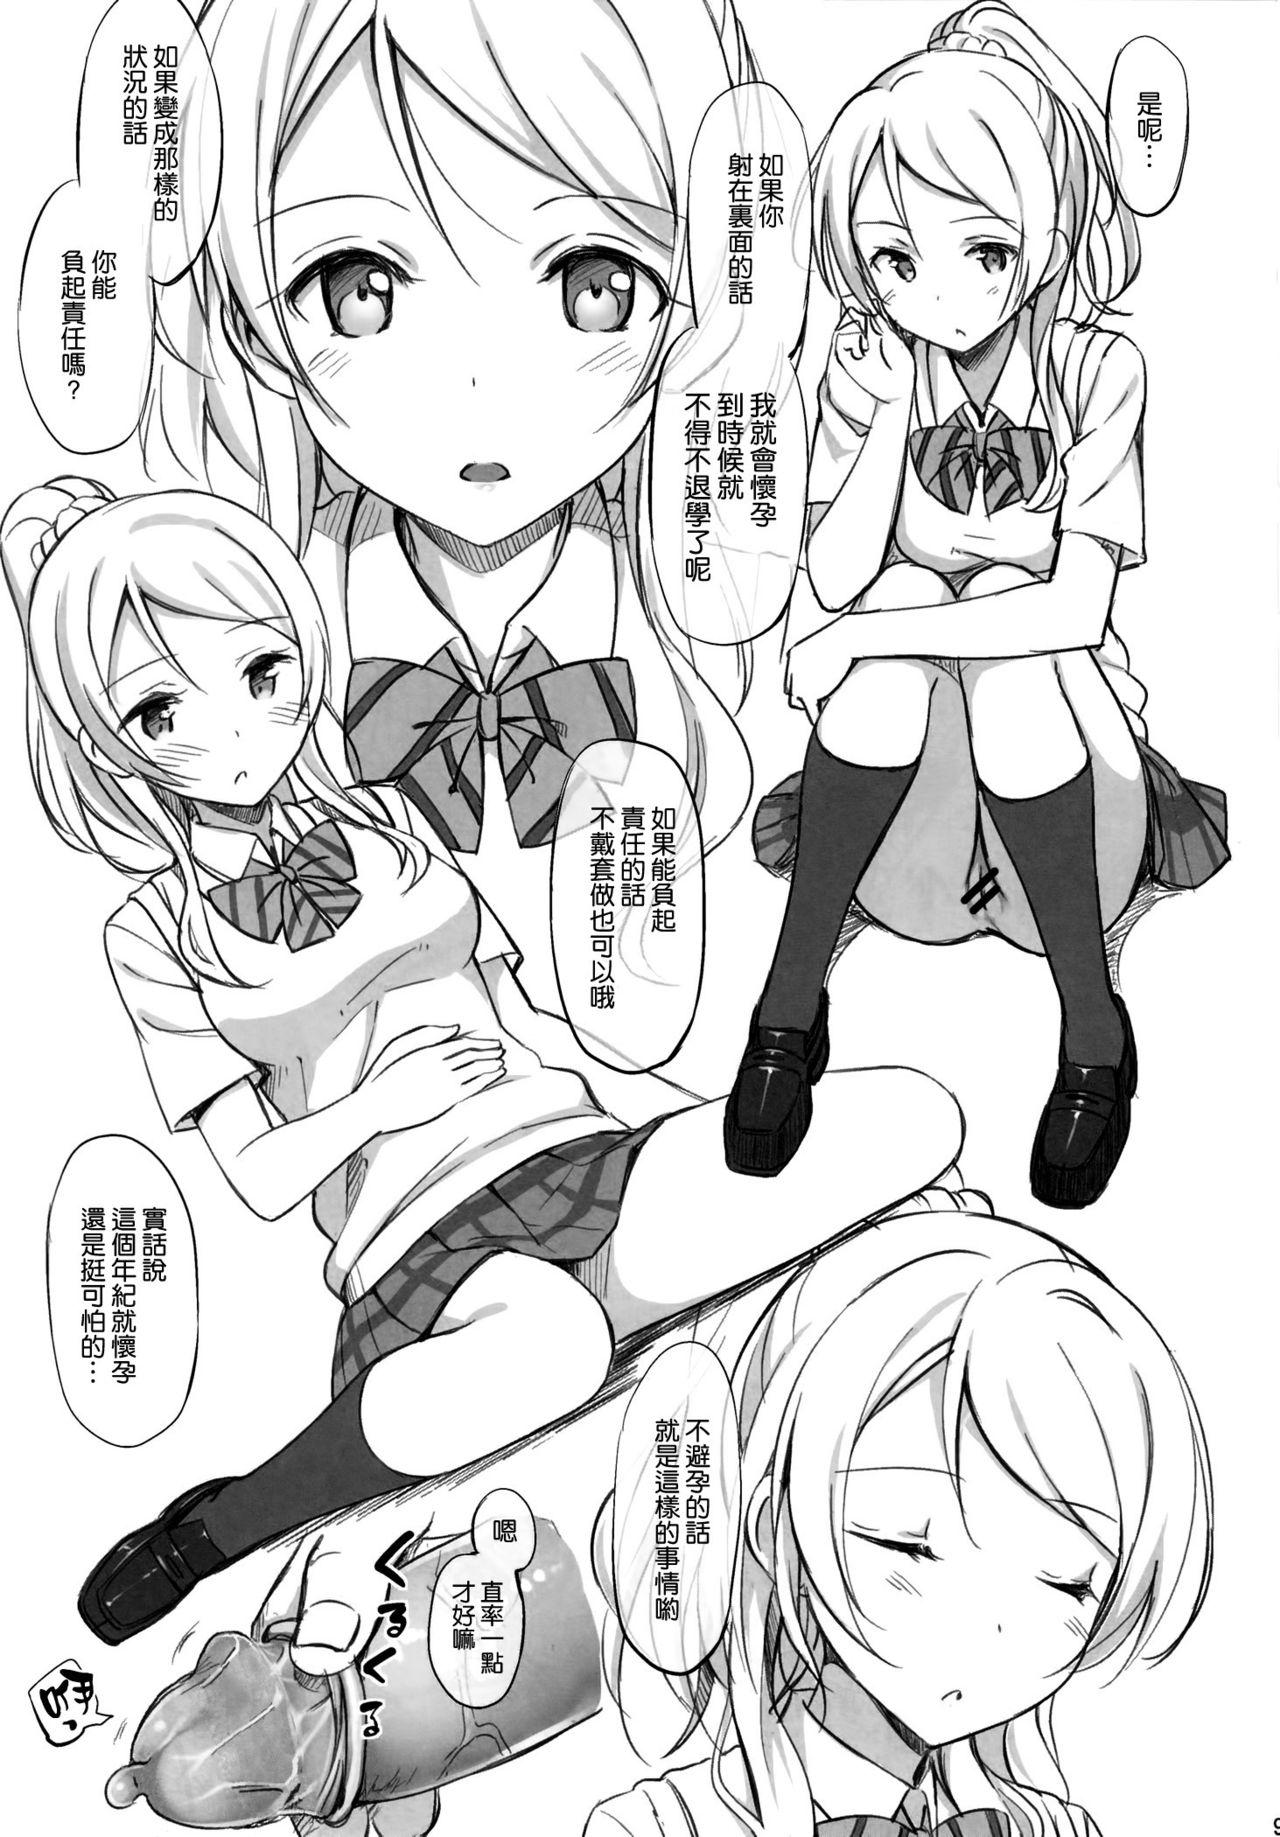 Buttplug School ldol off-shot - Love live Red Head - Page 9